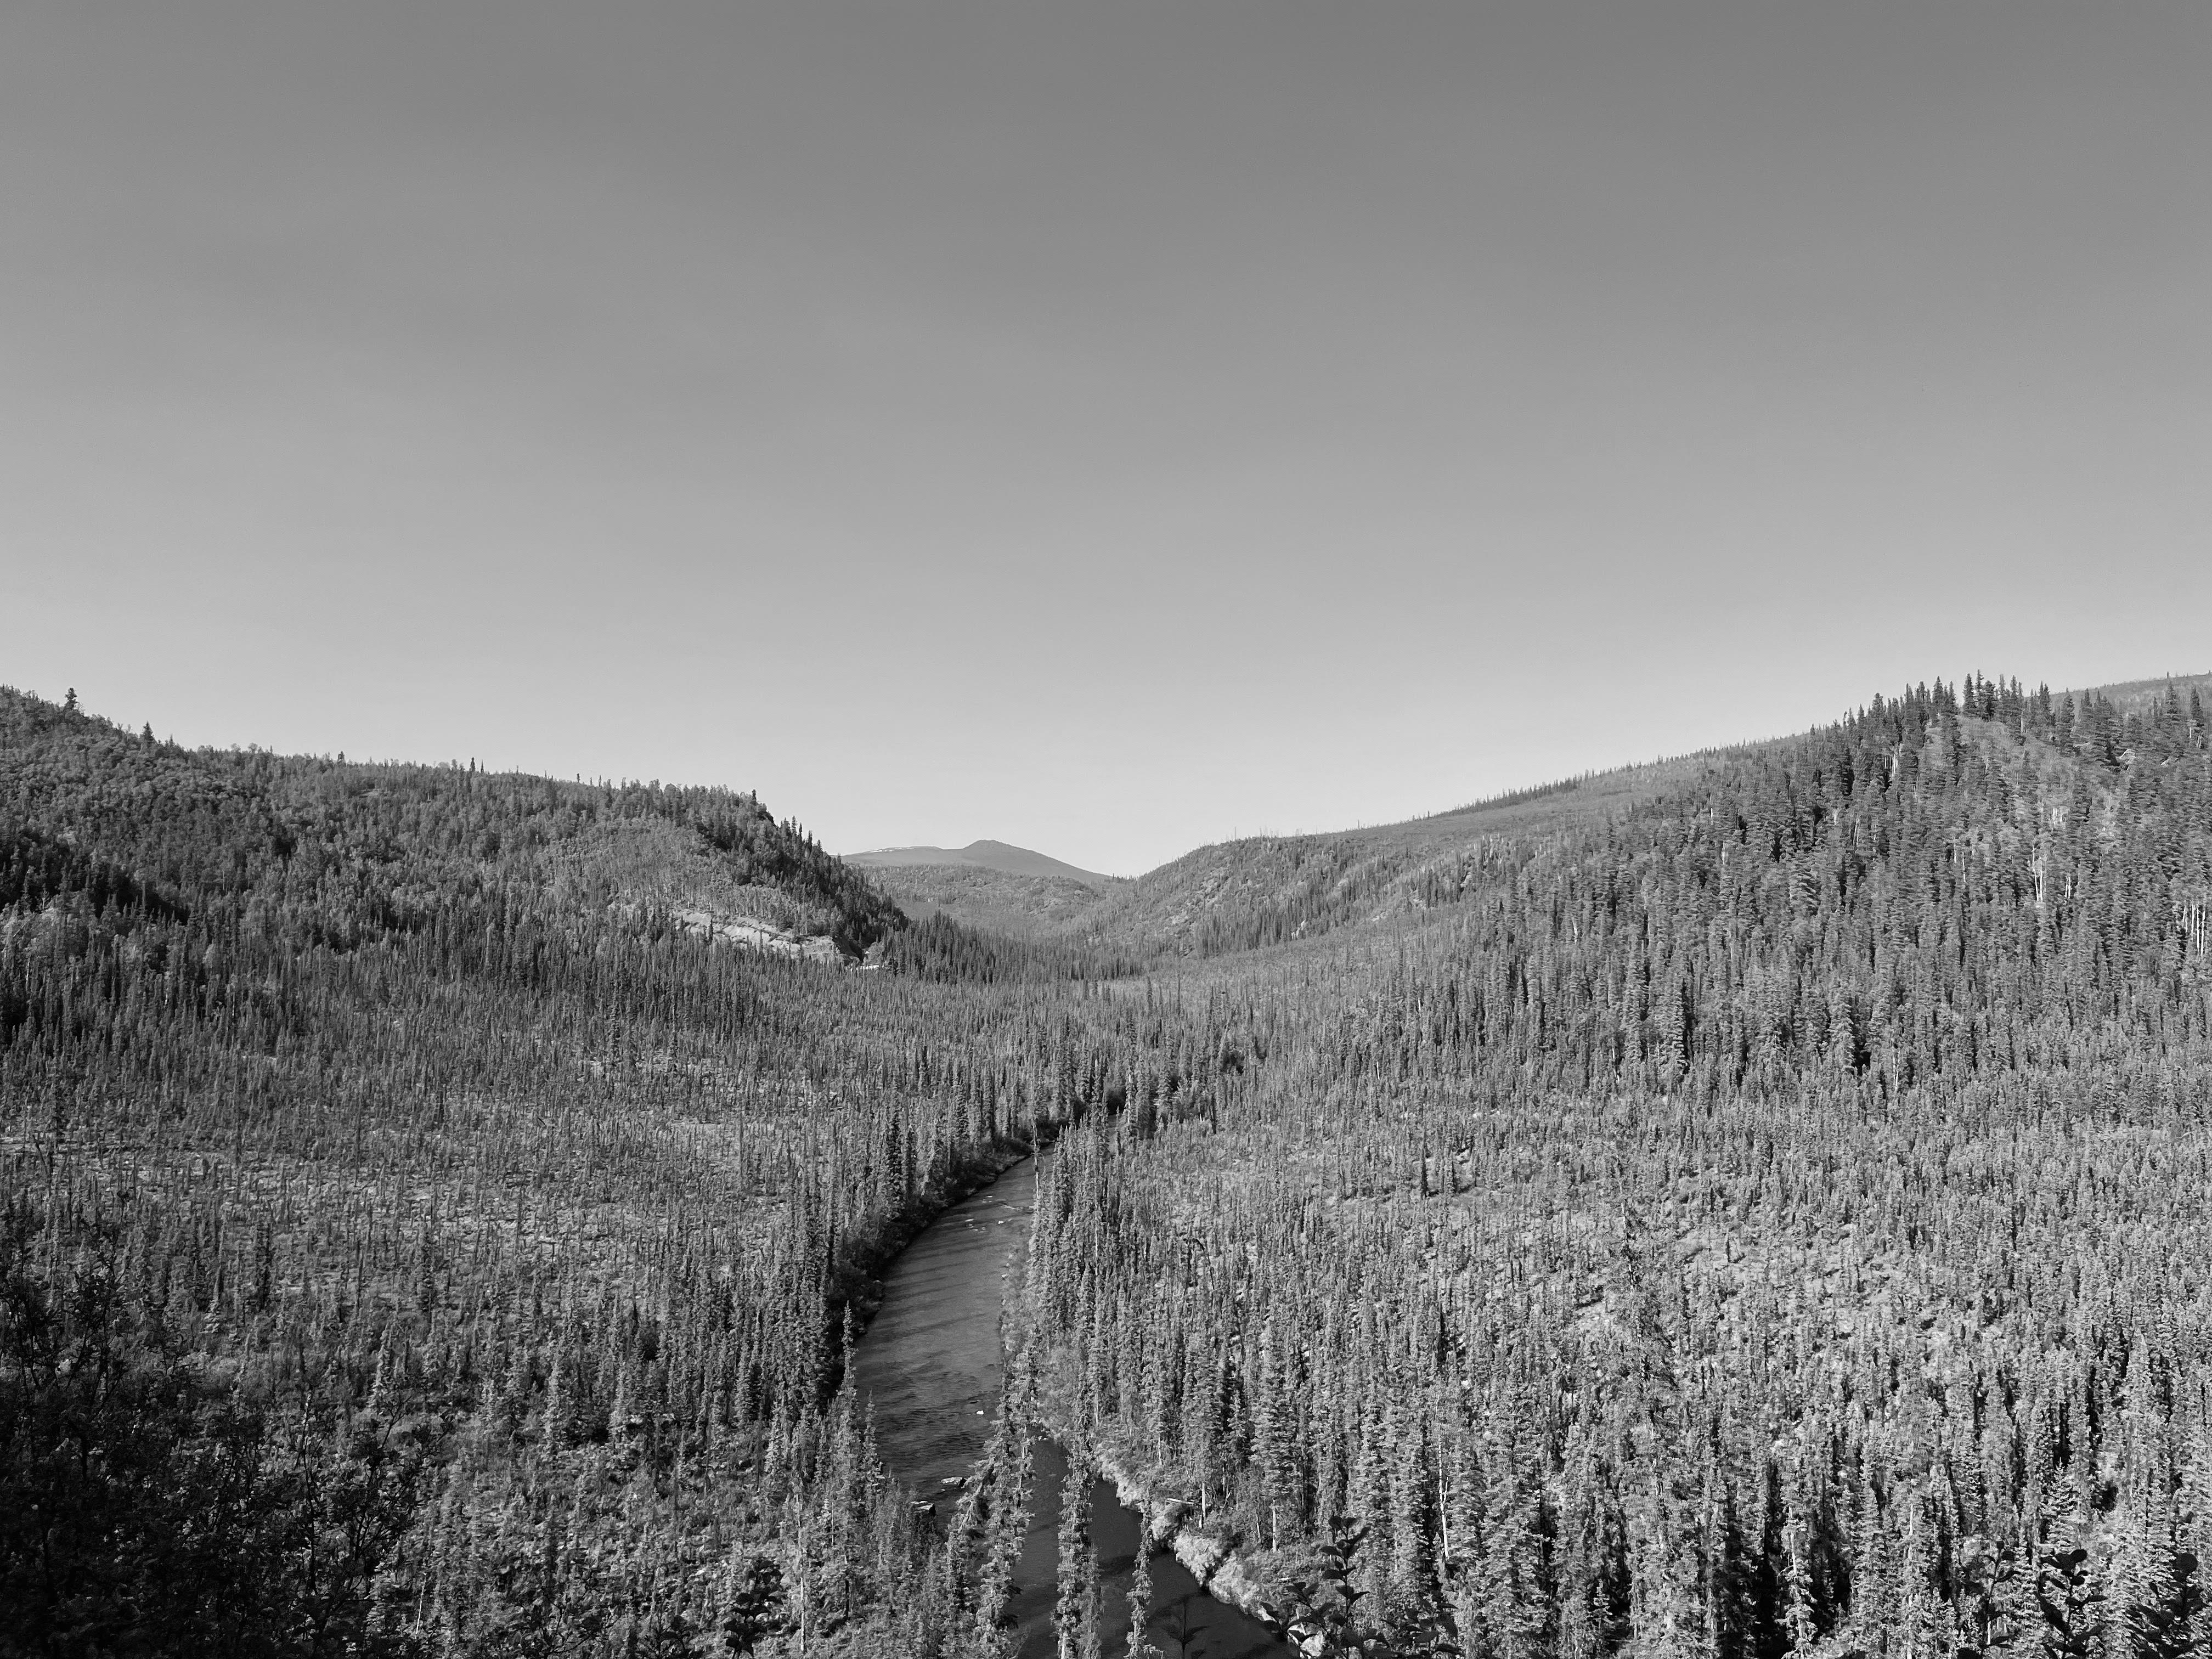 A black and white photo of a forest of evergreens closely surround a narrow river. The calmness and dark color of the river, and its clean shoreline against the forest makes the river look similar to a narrow road. Beyond the river bend, the forest expands over mountains in the distance.